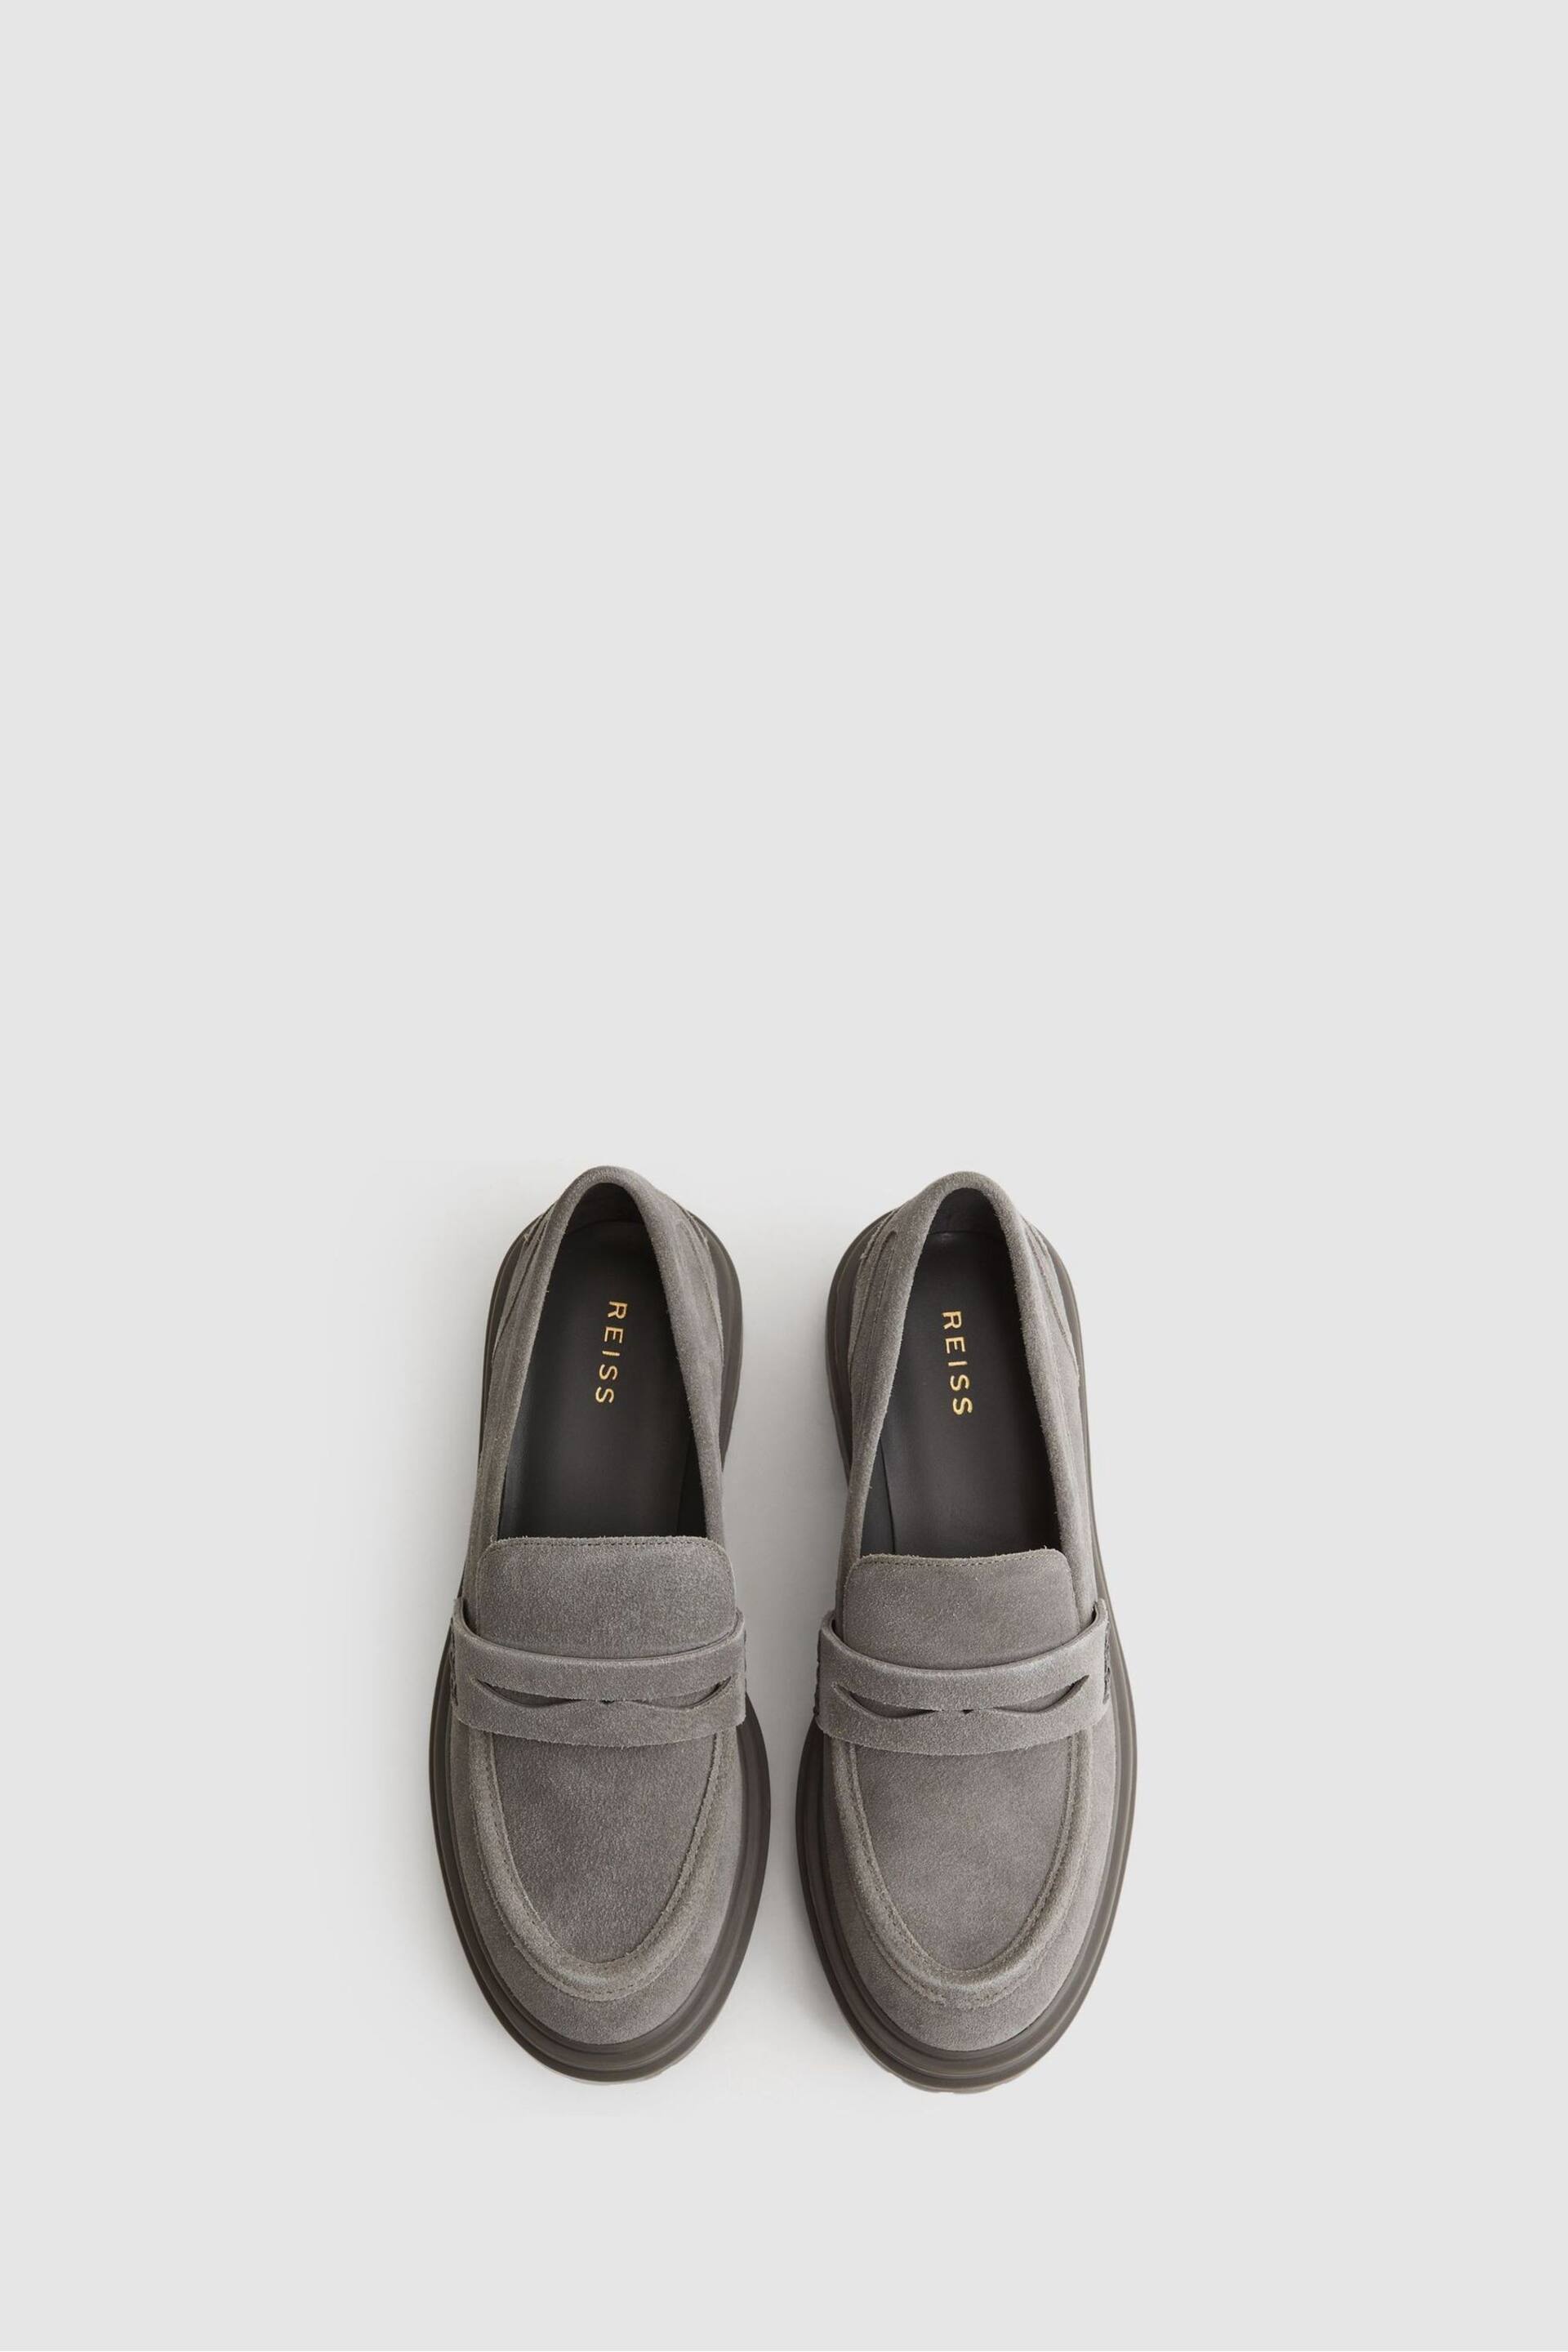 Reiss Grey Adele Leather Chunky Cleated Loafers - Image 3 of 5